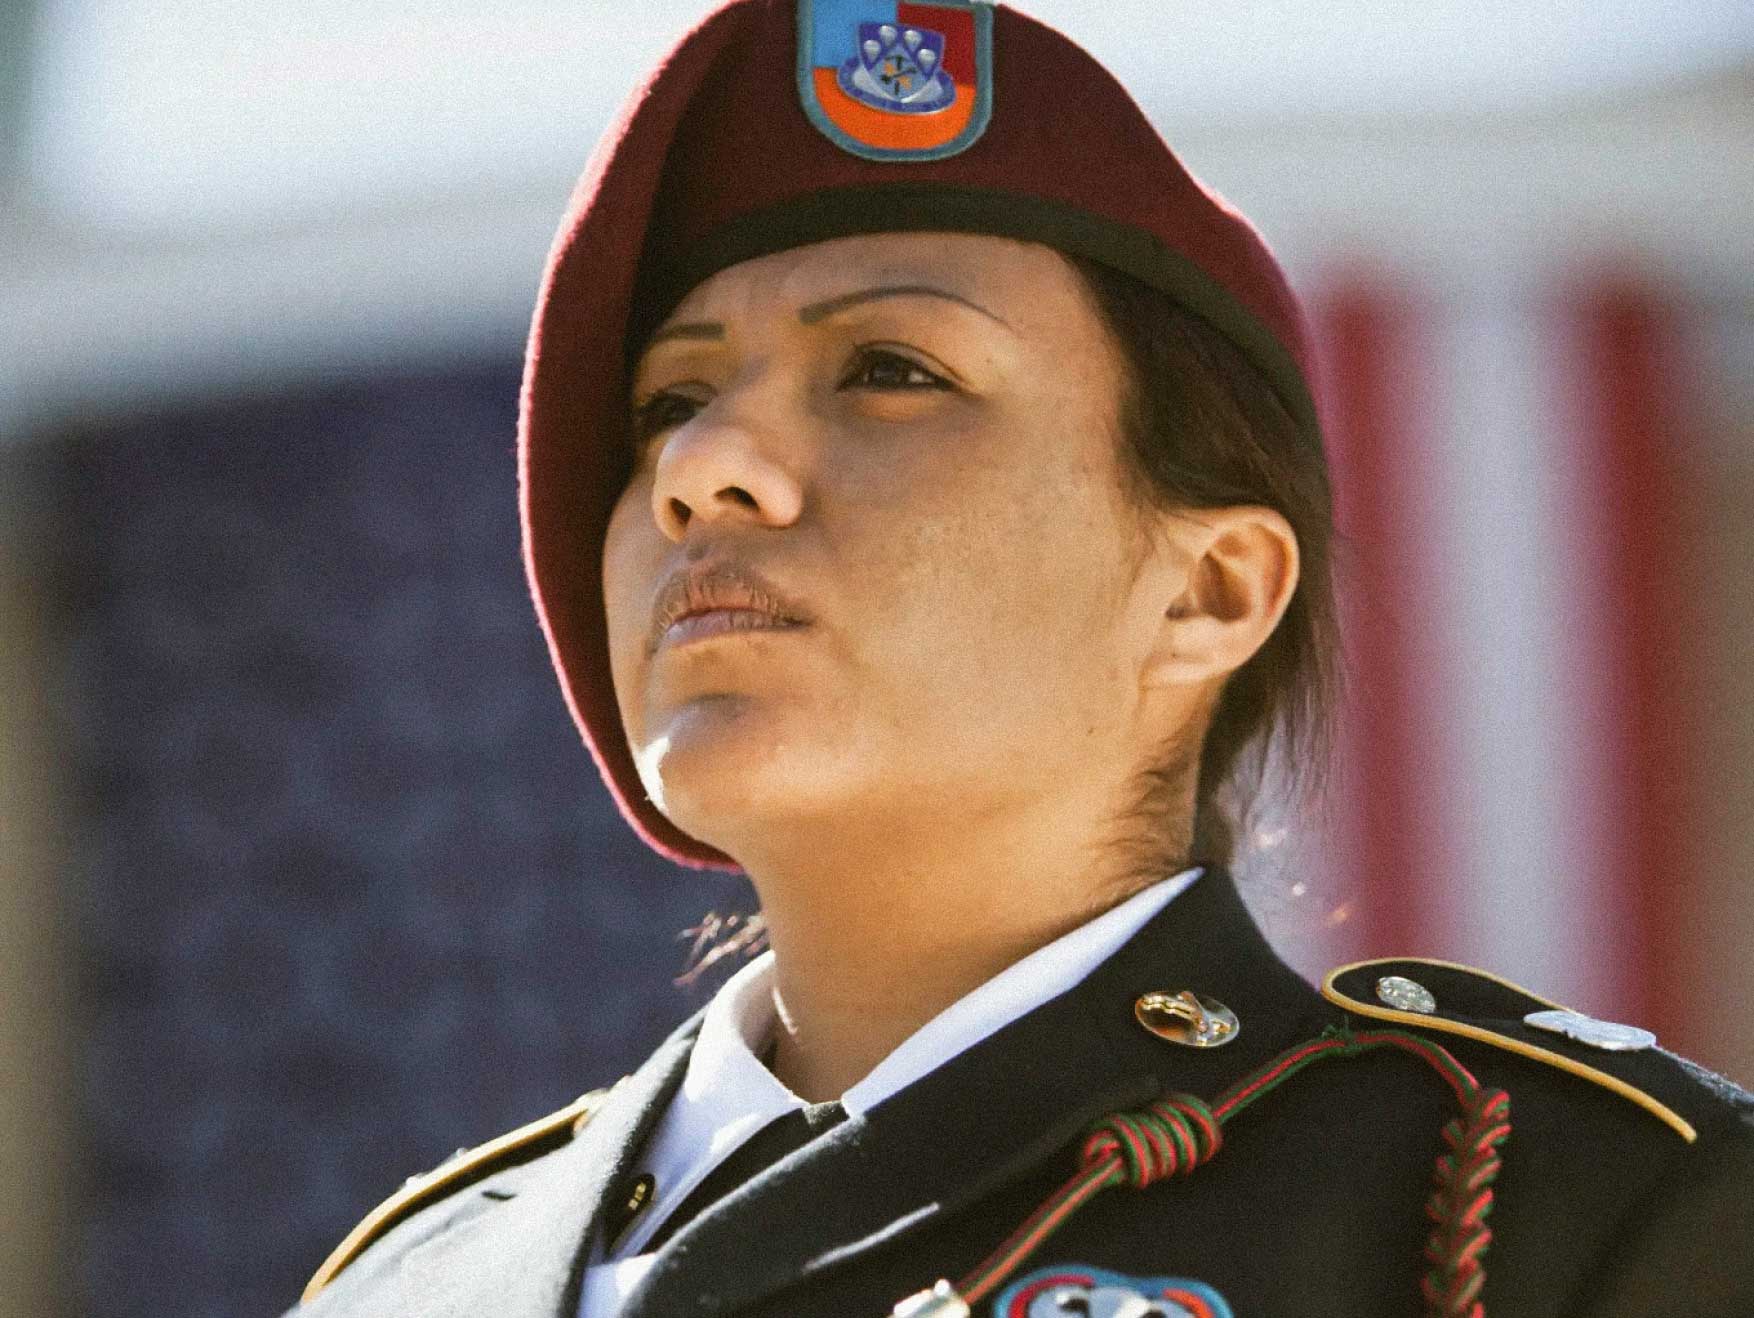 A female Specialist wearing Class A uniform standing outside during the day in front of the US flag